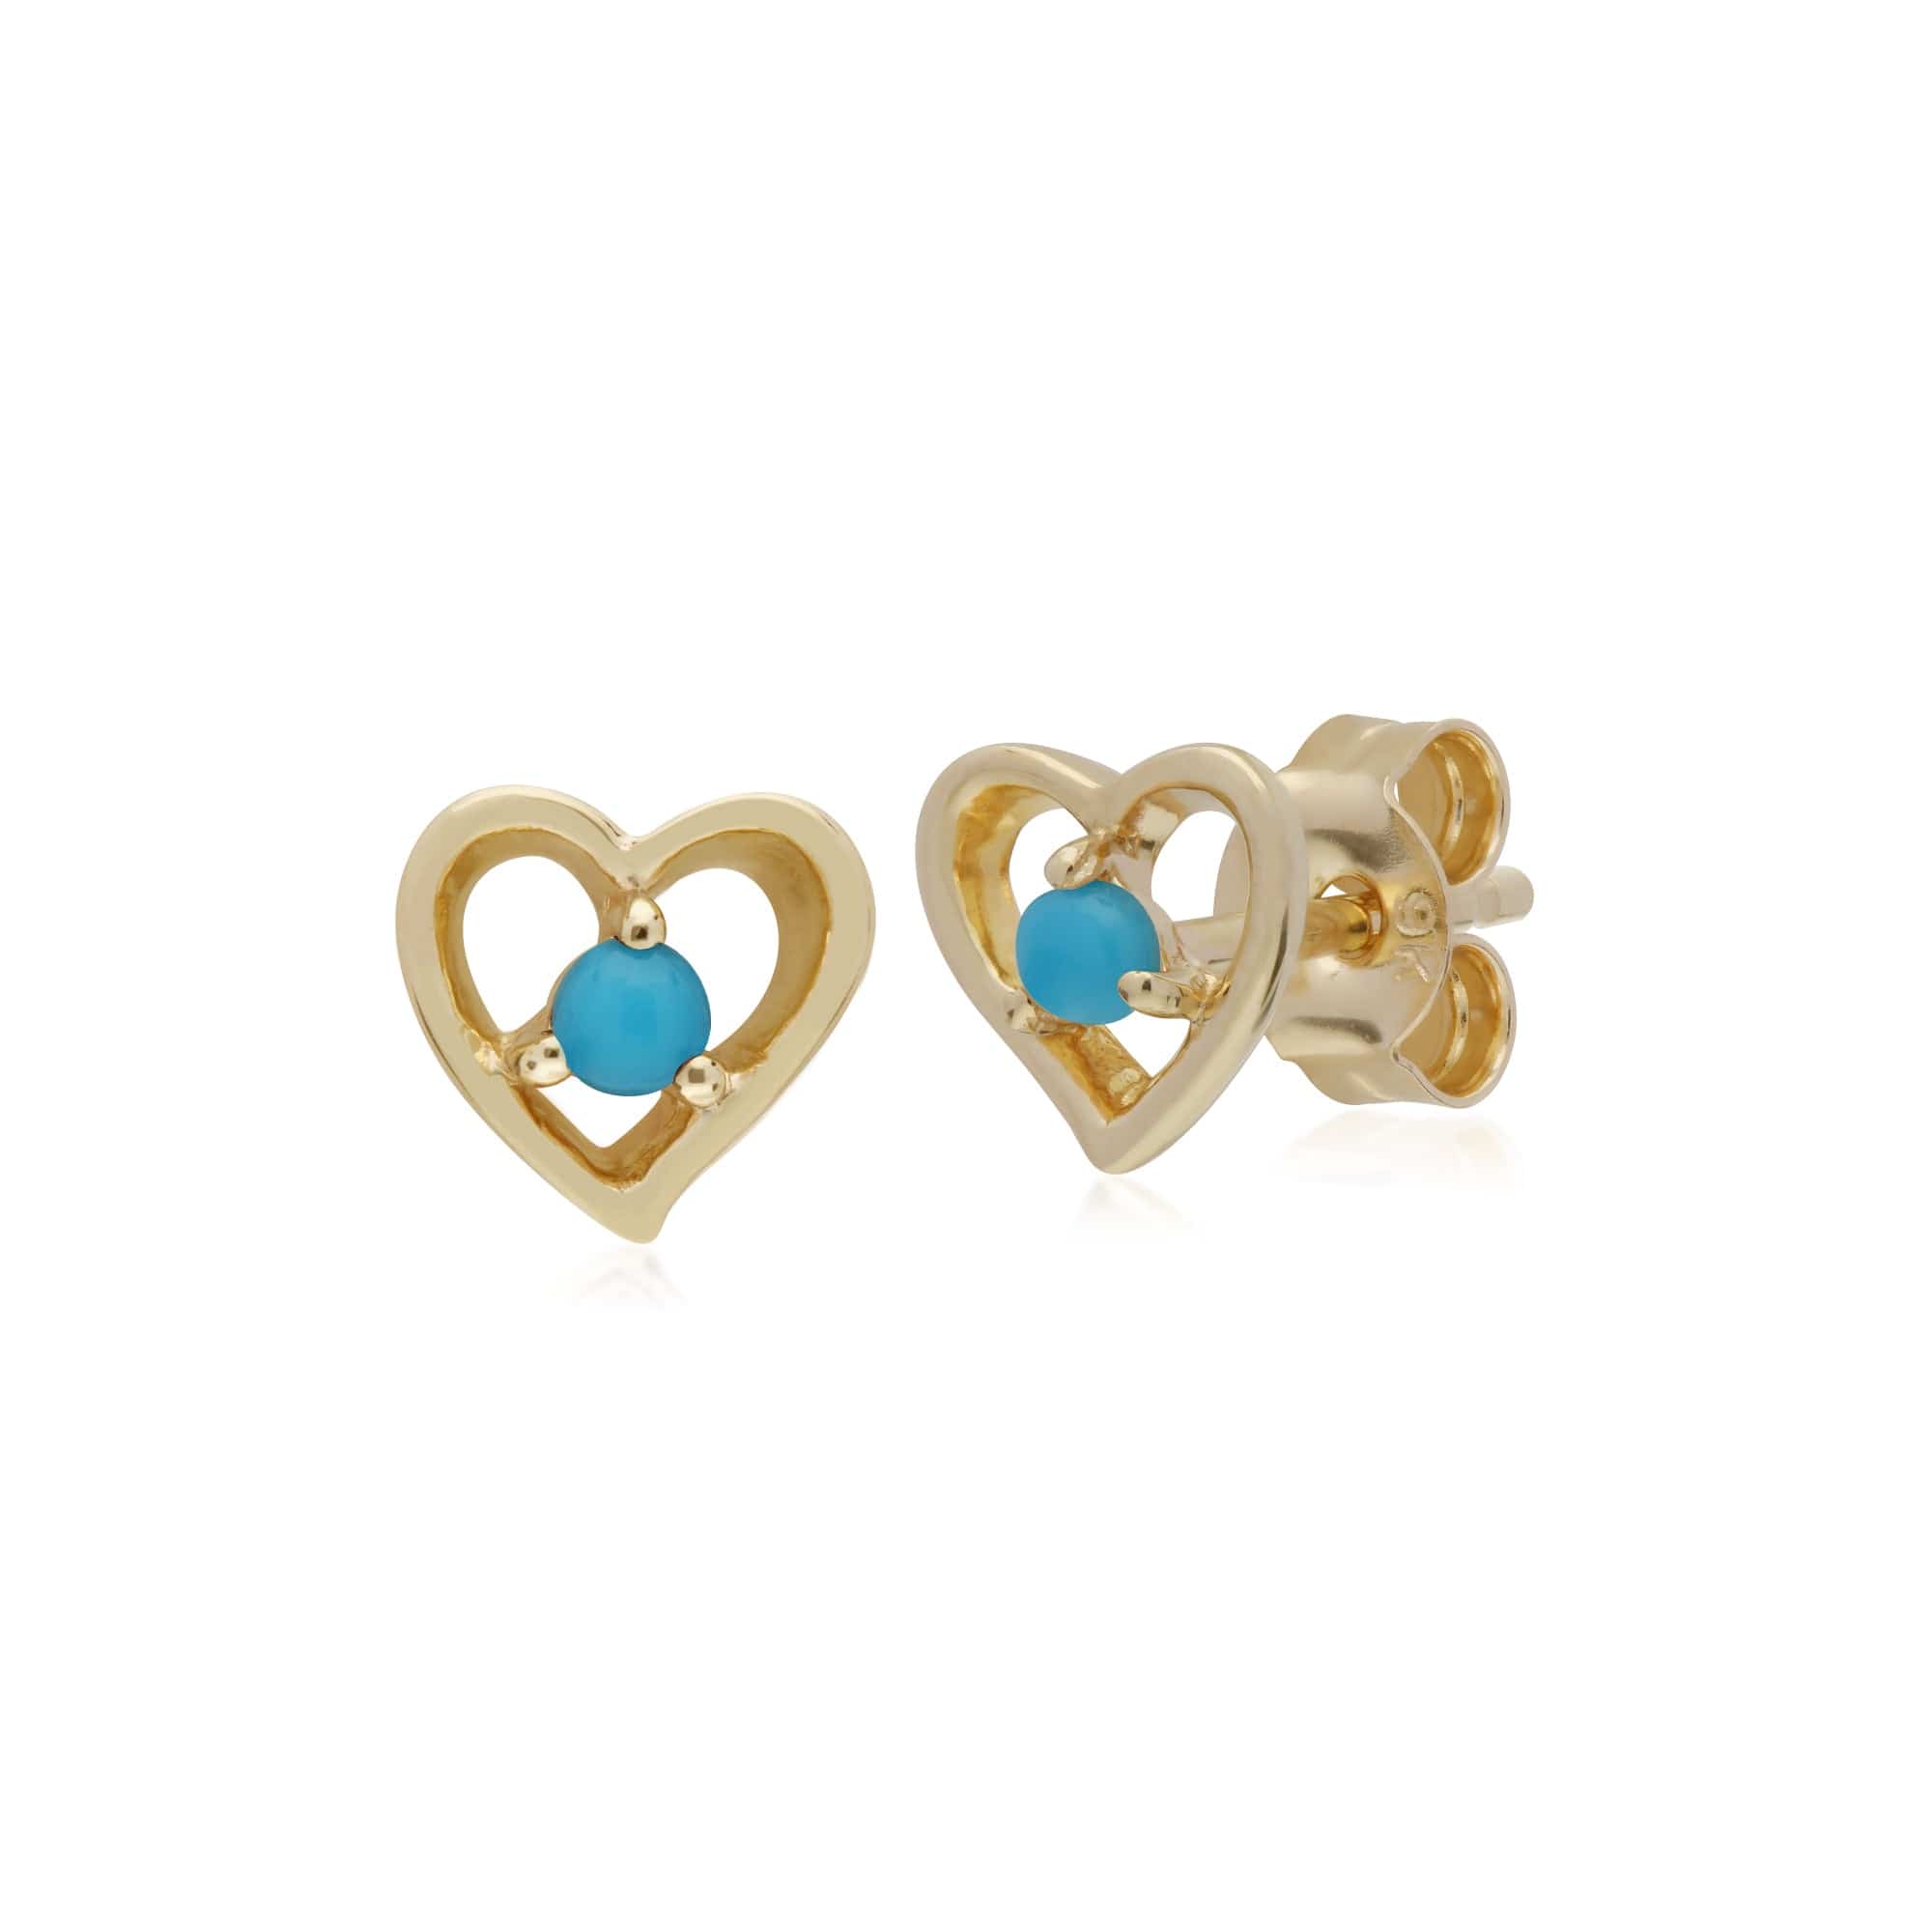 135E1564019-135P1902019 Classic Round Turquoise Single Stone Heart Stud Earrings & Necklace Set in 9ct Yellow Gold 2